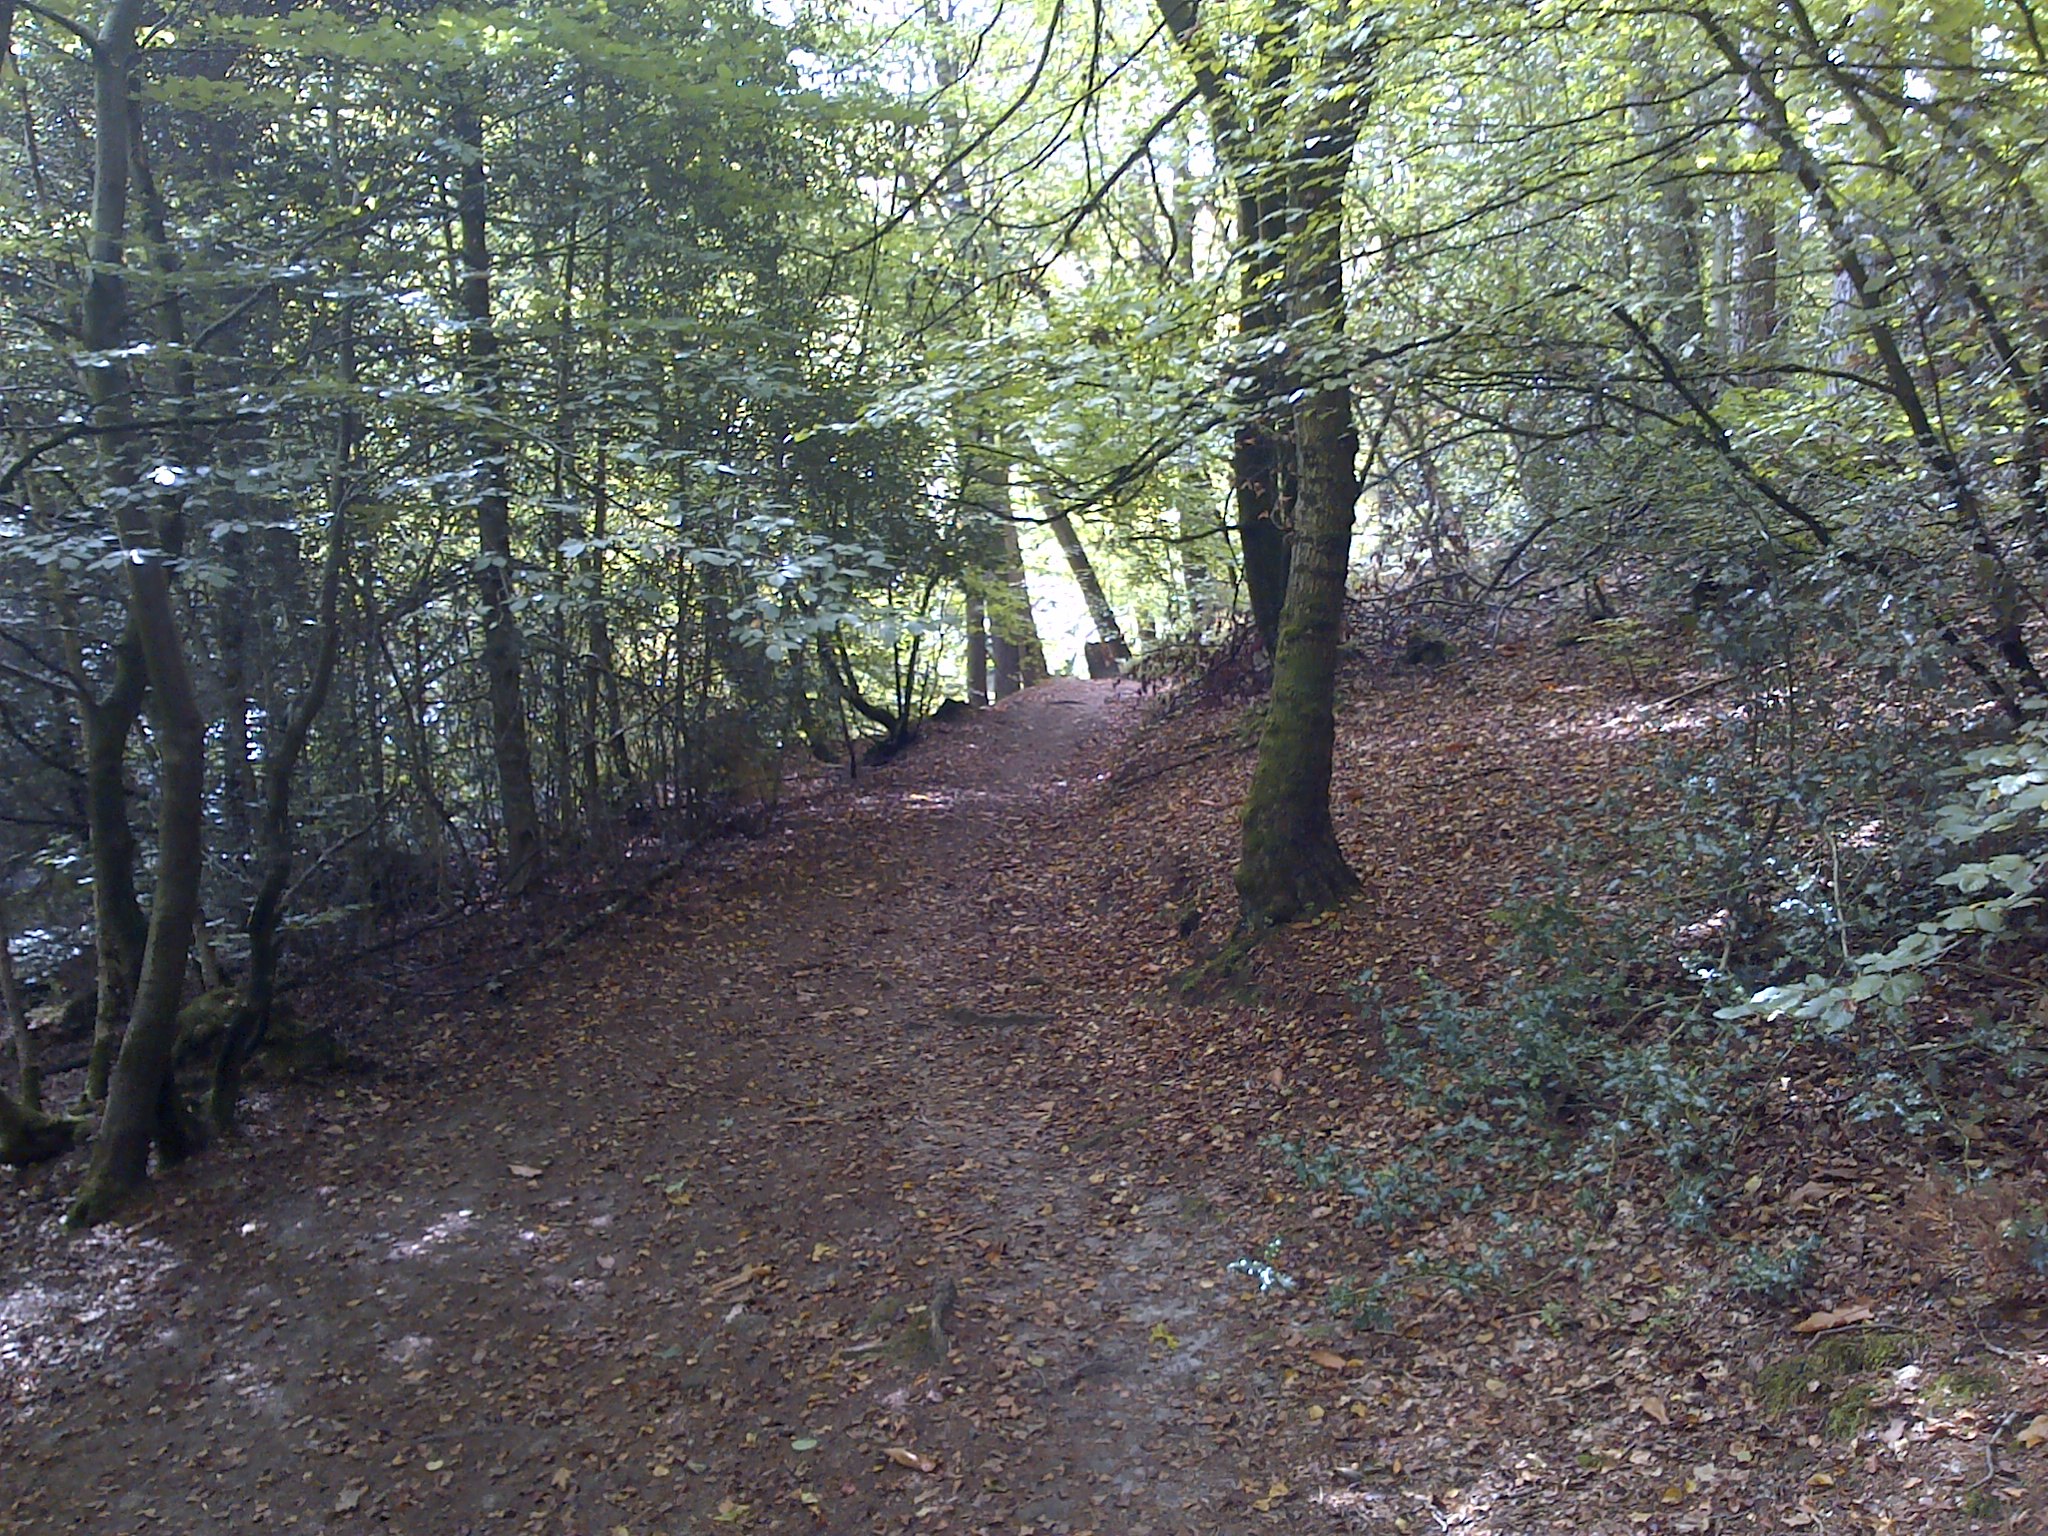 A path runs through a wooded area with a line of trees to the left and rising ground to the right. A shaded area on a sunny day.